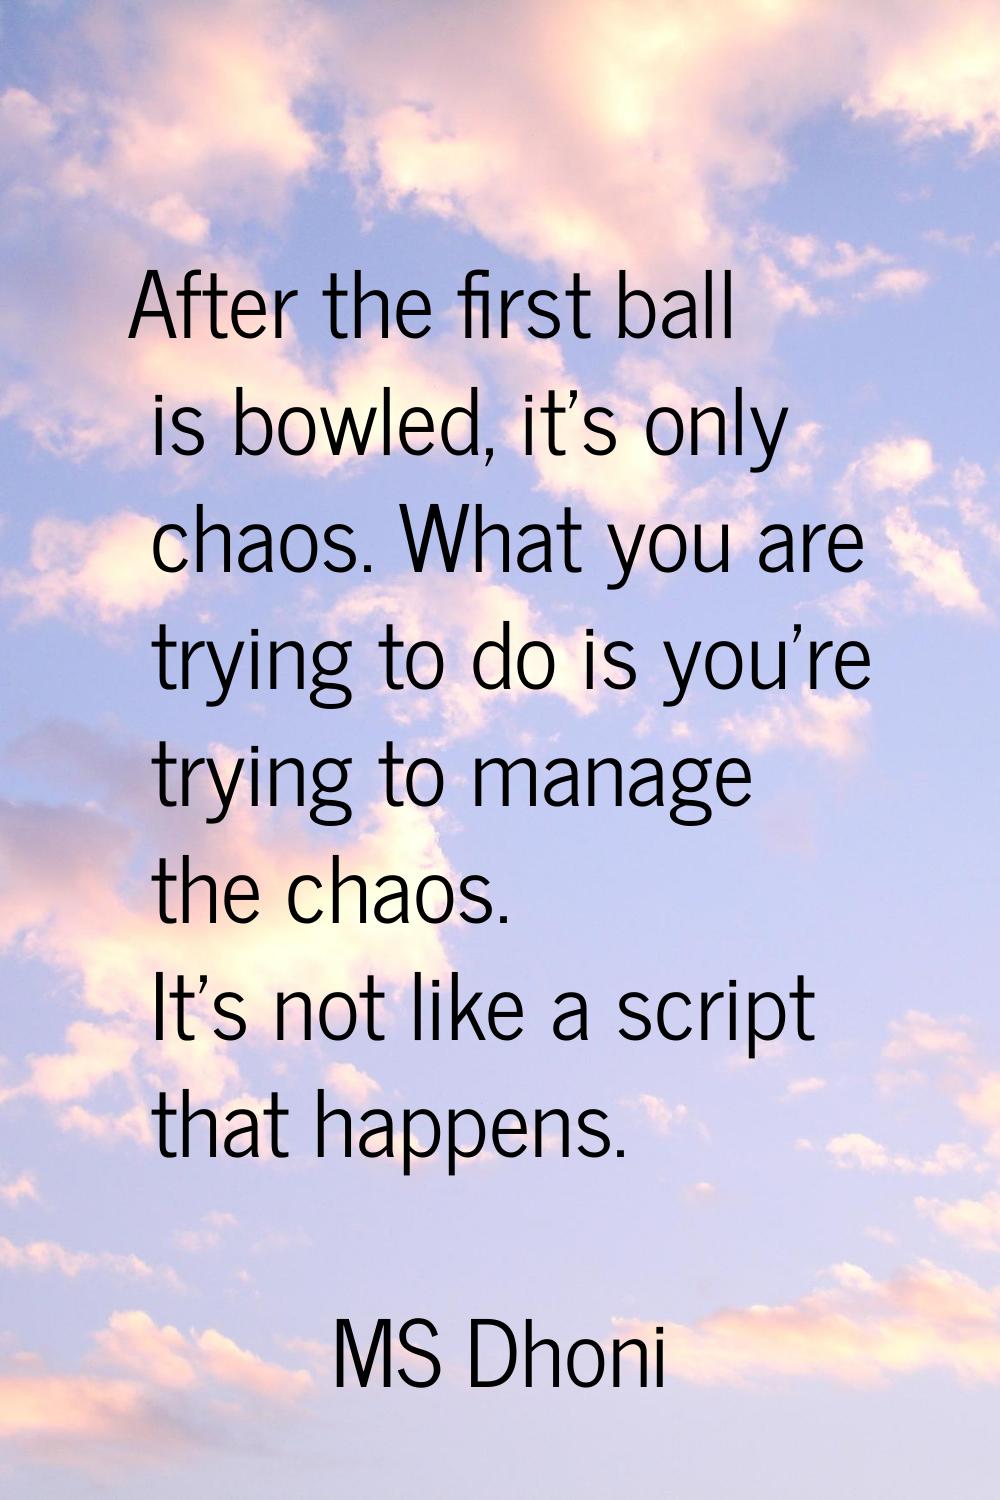 After the first ball is bowled, it's only chaos. What you are trying to do is you're trying to mana